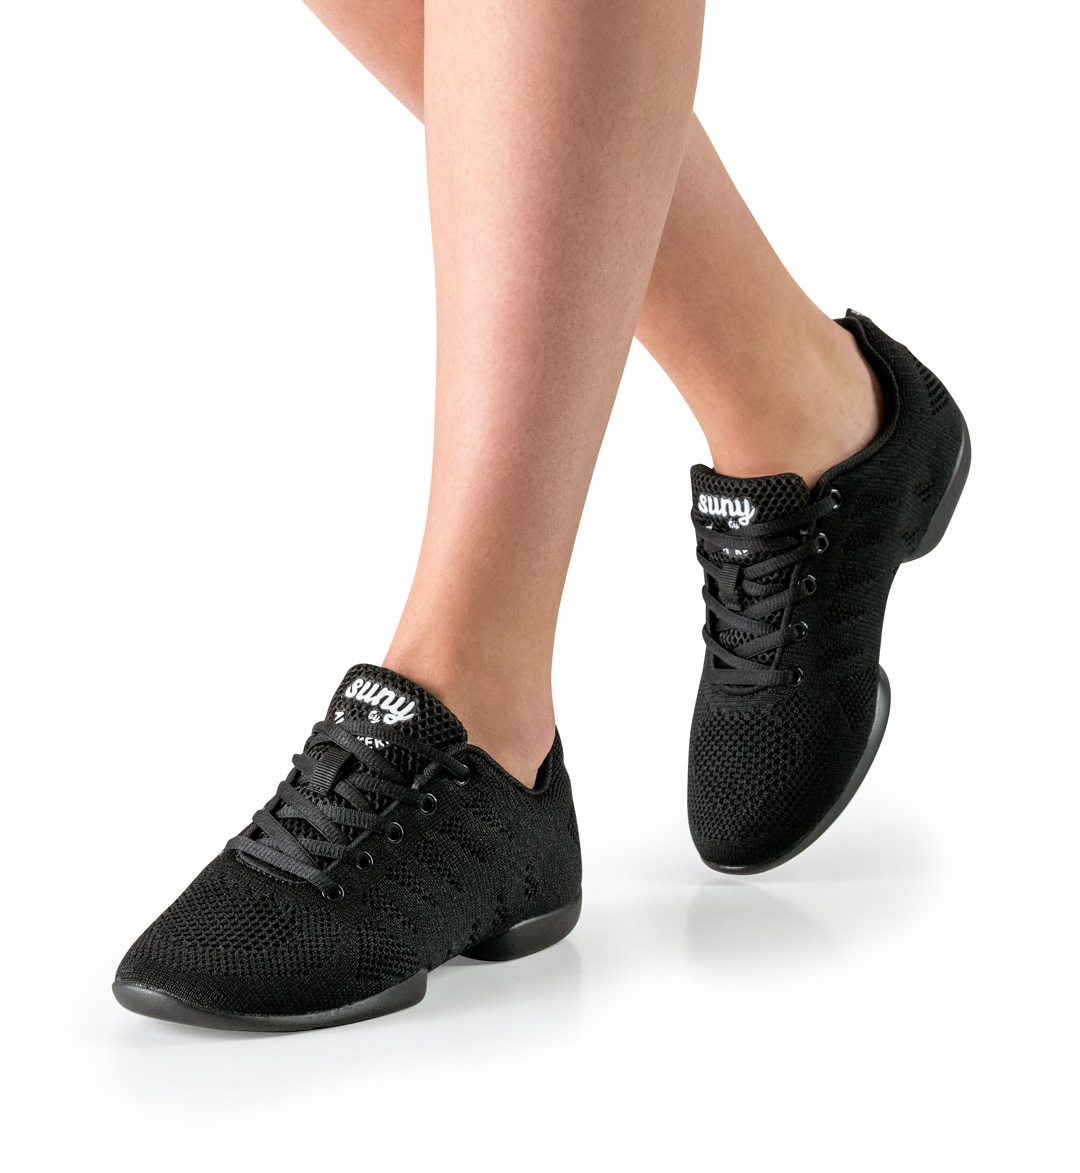 Women's dance sneaker with five-hole lacing by Suny